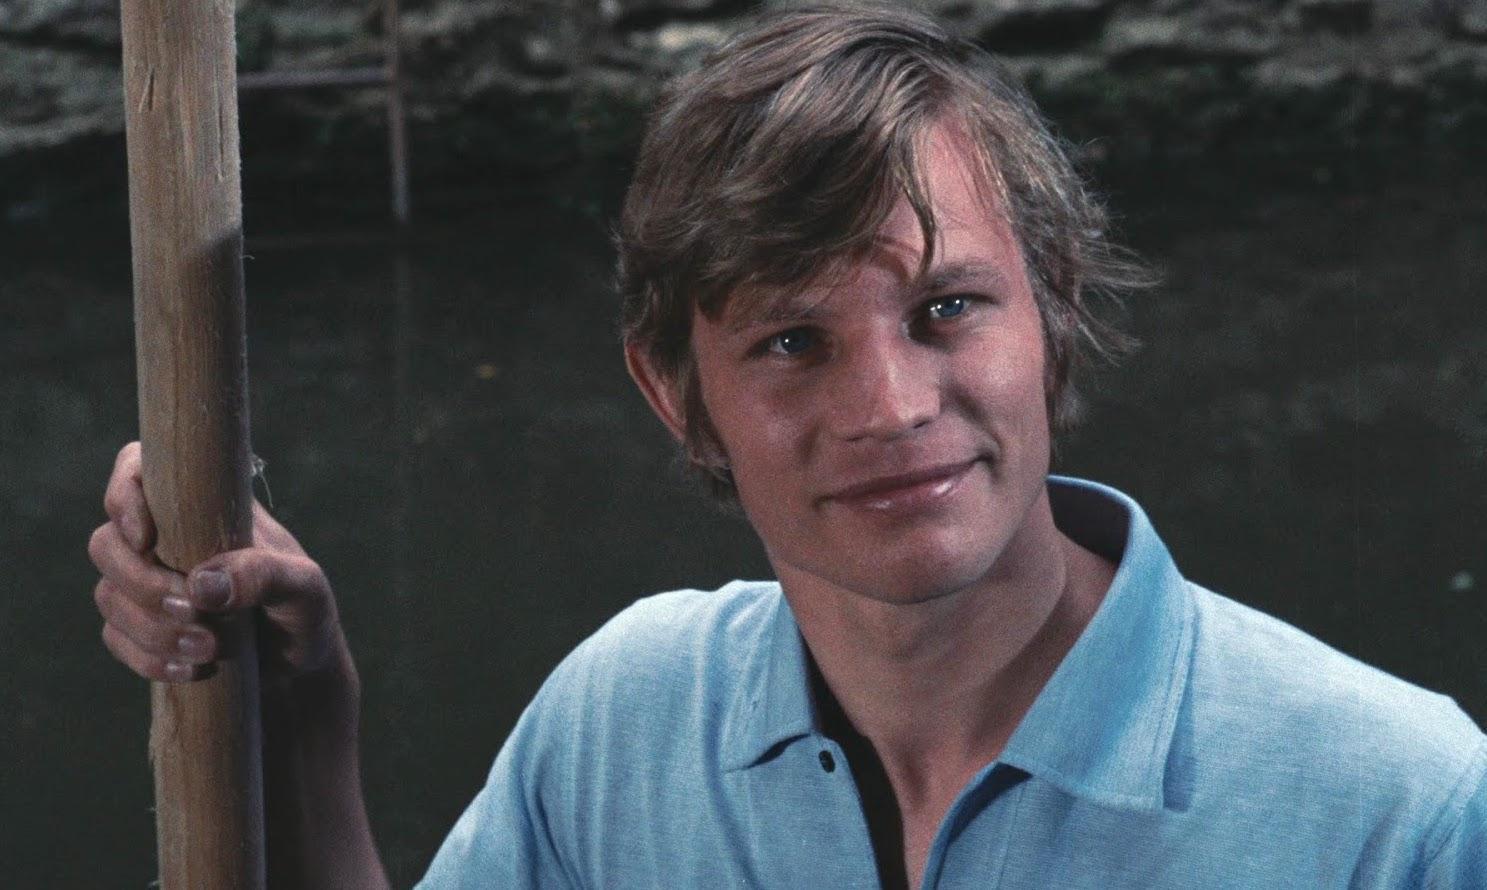 Actor Michael York in the 1967 film Accident, directed by Joseph Losey and starring Dirk Bogarde and Delphine Seyrig